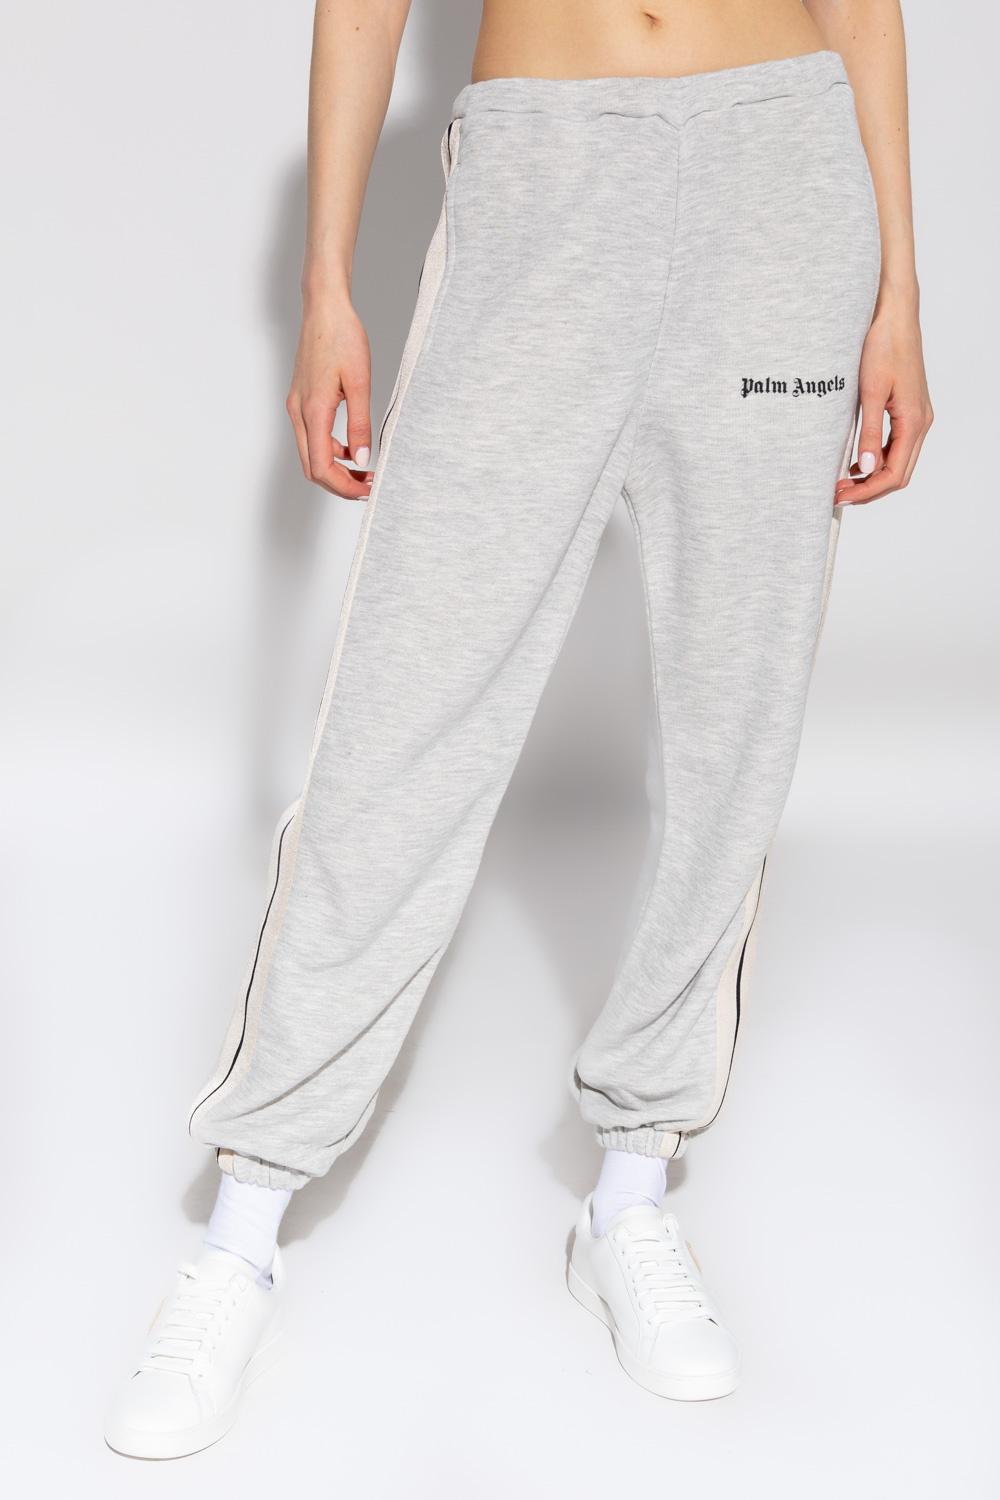 Palm Angels Sweatpants with side stripes | Women's Clothing | Vitkac